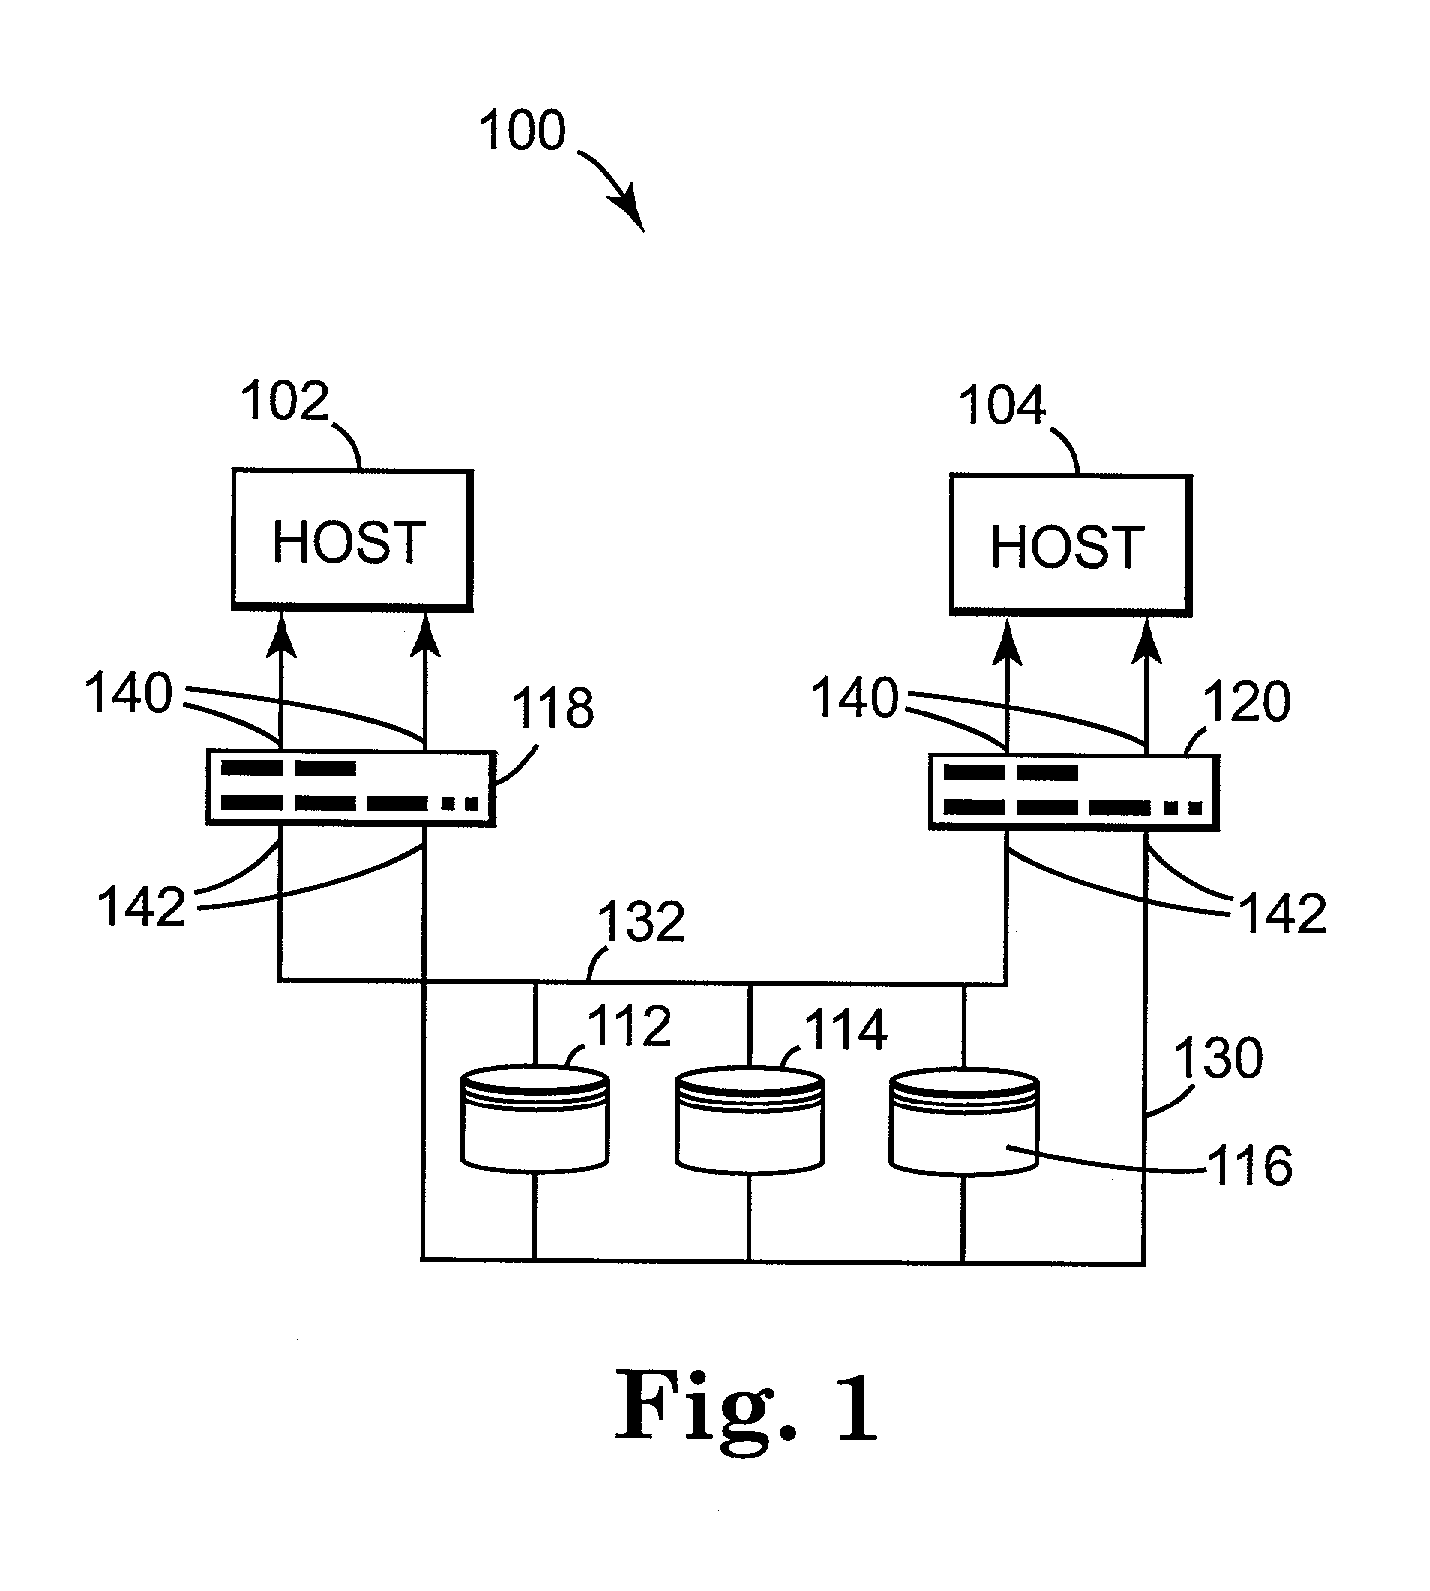 Apparatus for reducing the overhead of cache coherency processing on each primary controller and increasing the overall throughput of the system